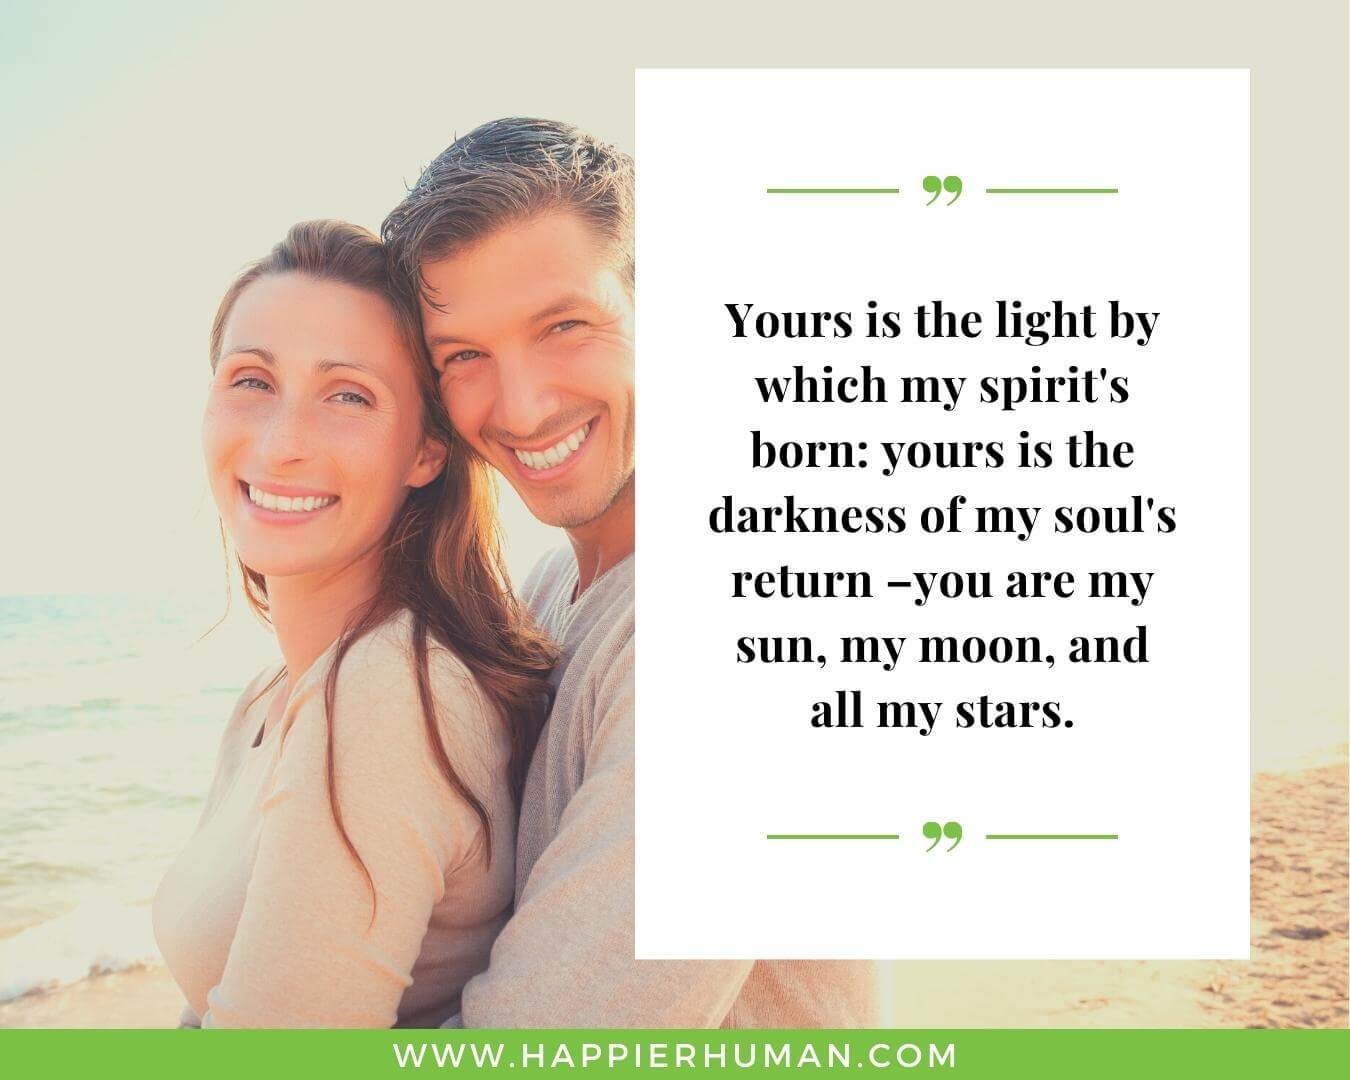 Unconditional Love Quotes for Her - “Yours is the light by which my spirit's born: yours is the darkness of my soul's return –you are my sun, my moon, and all my stars.”